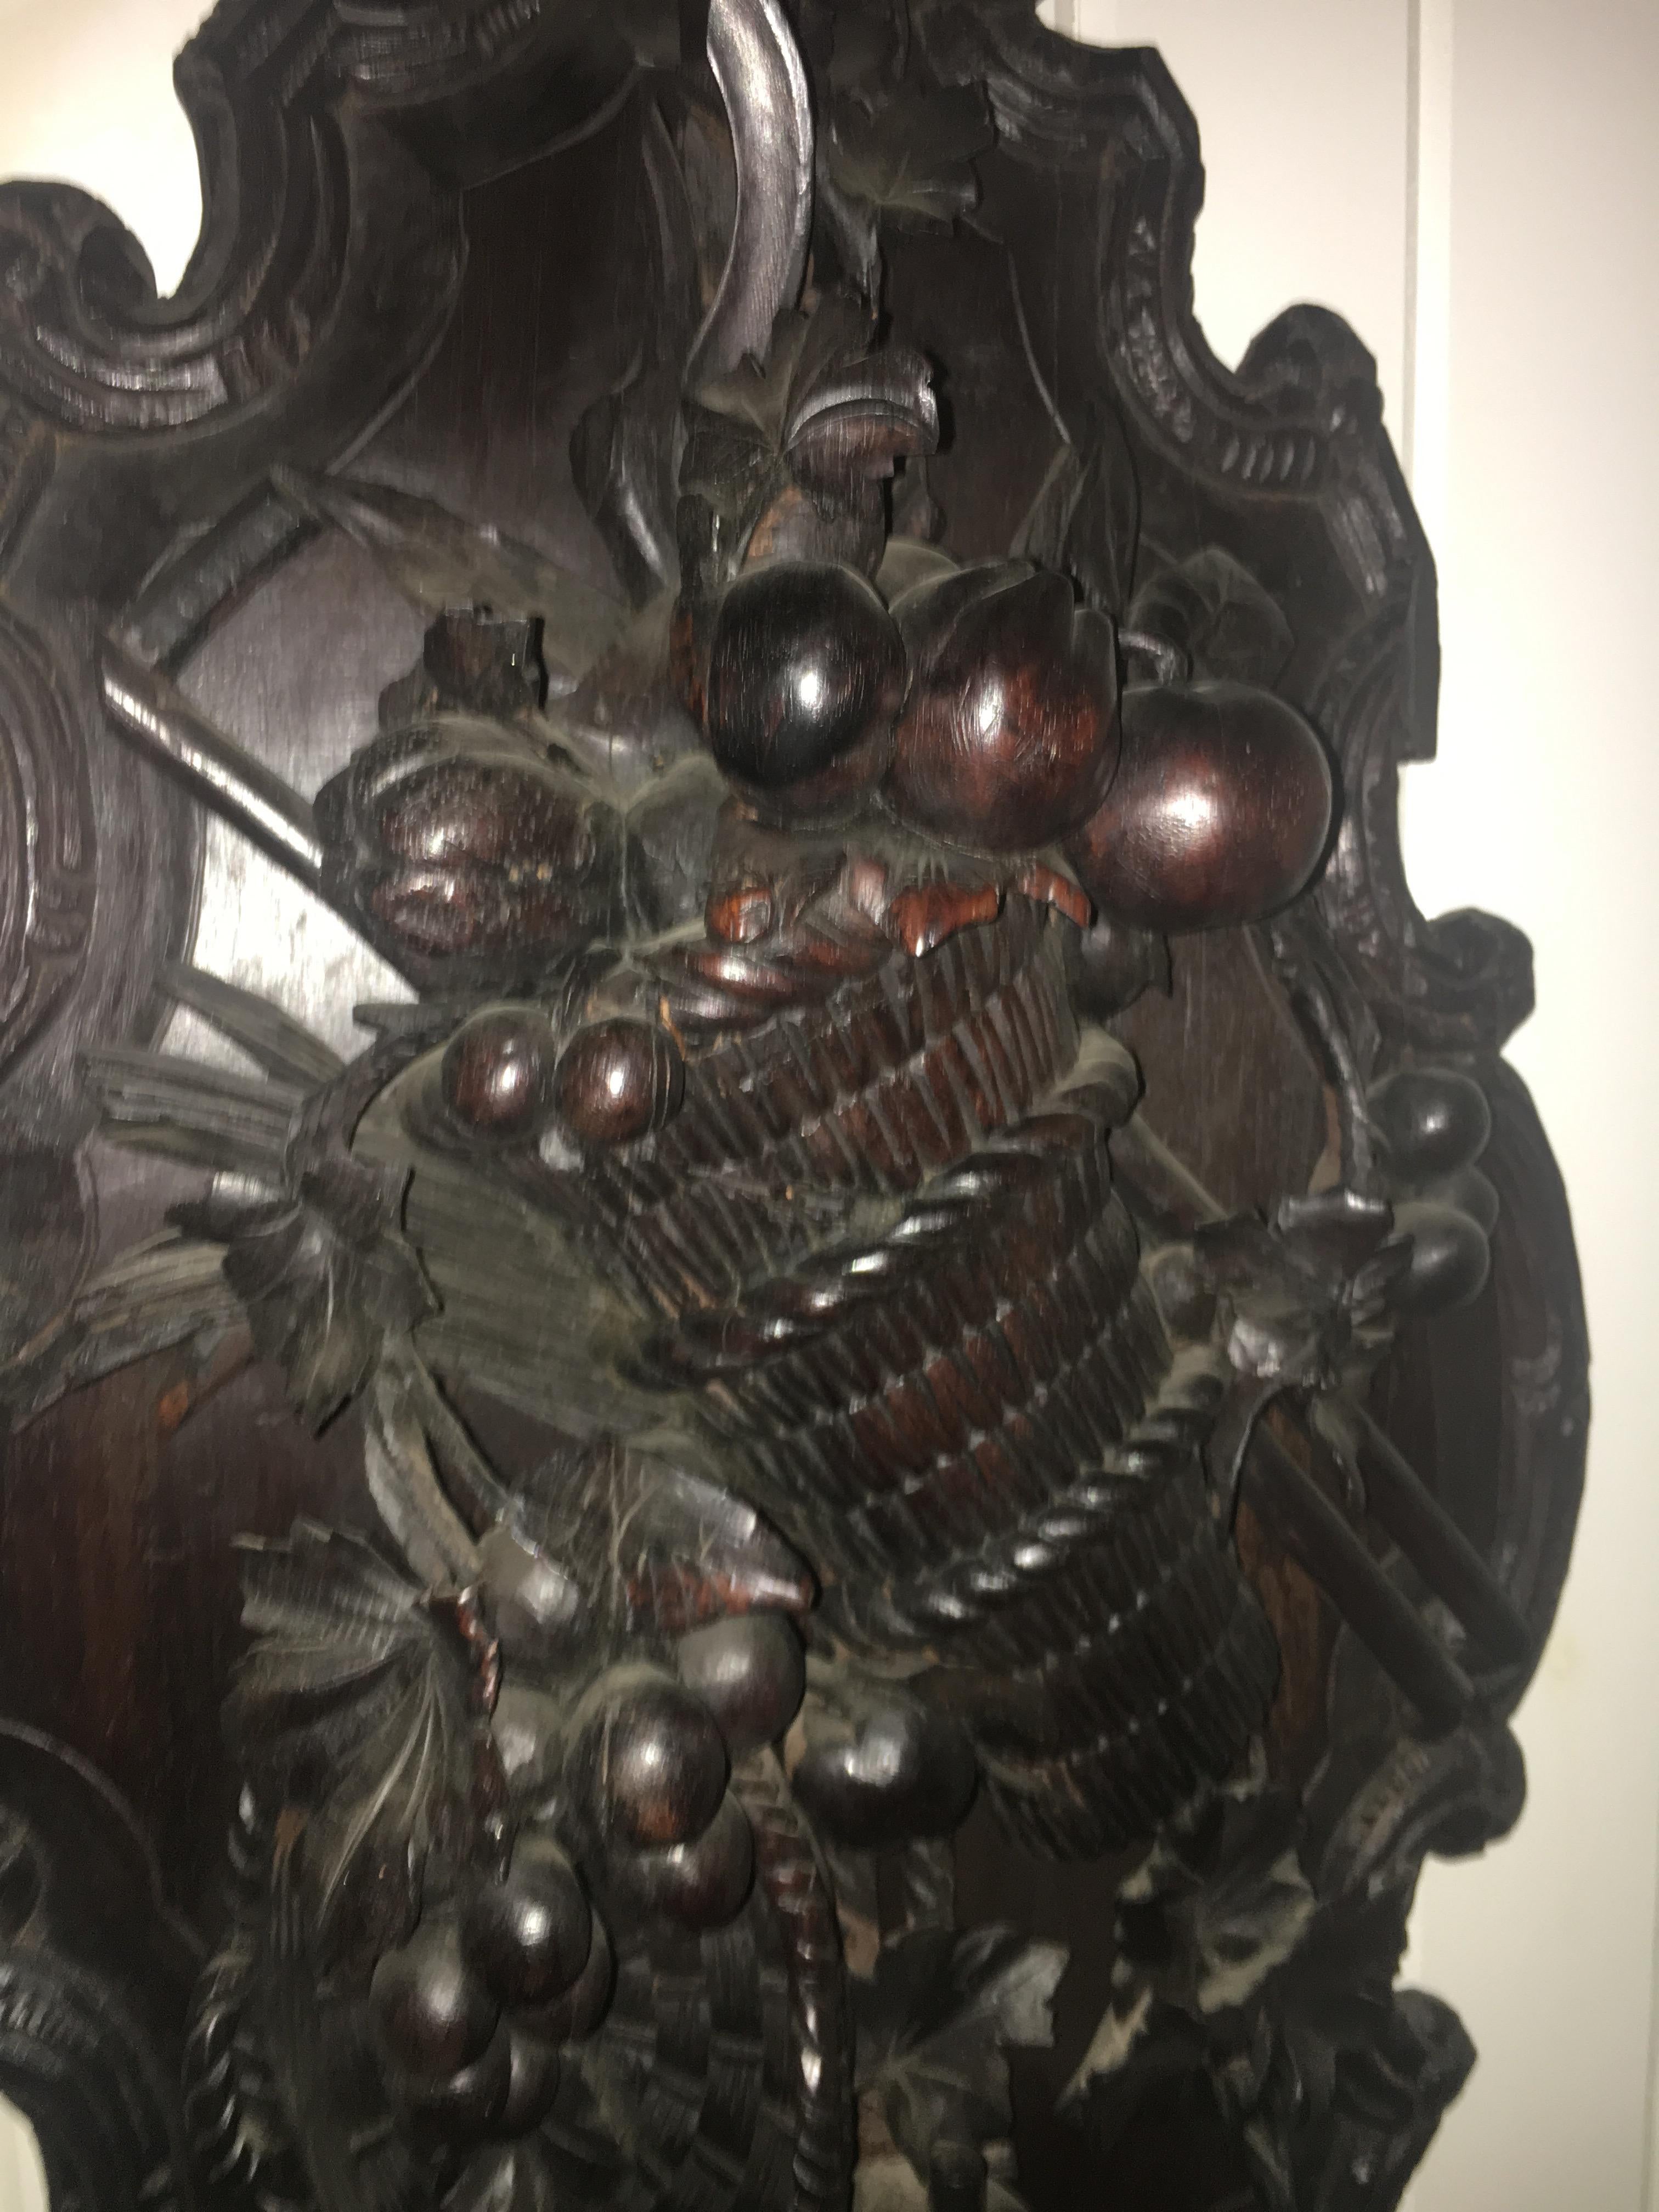 Exceptional 19th Century Black Forest Carving of Basket and Fruit In Excellent Condition For Sale In Buchanan, MI